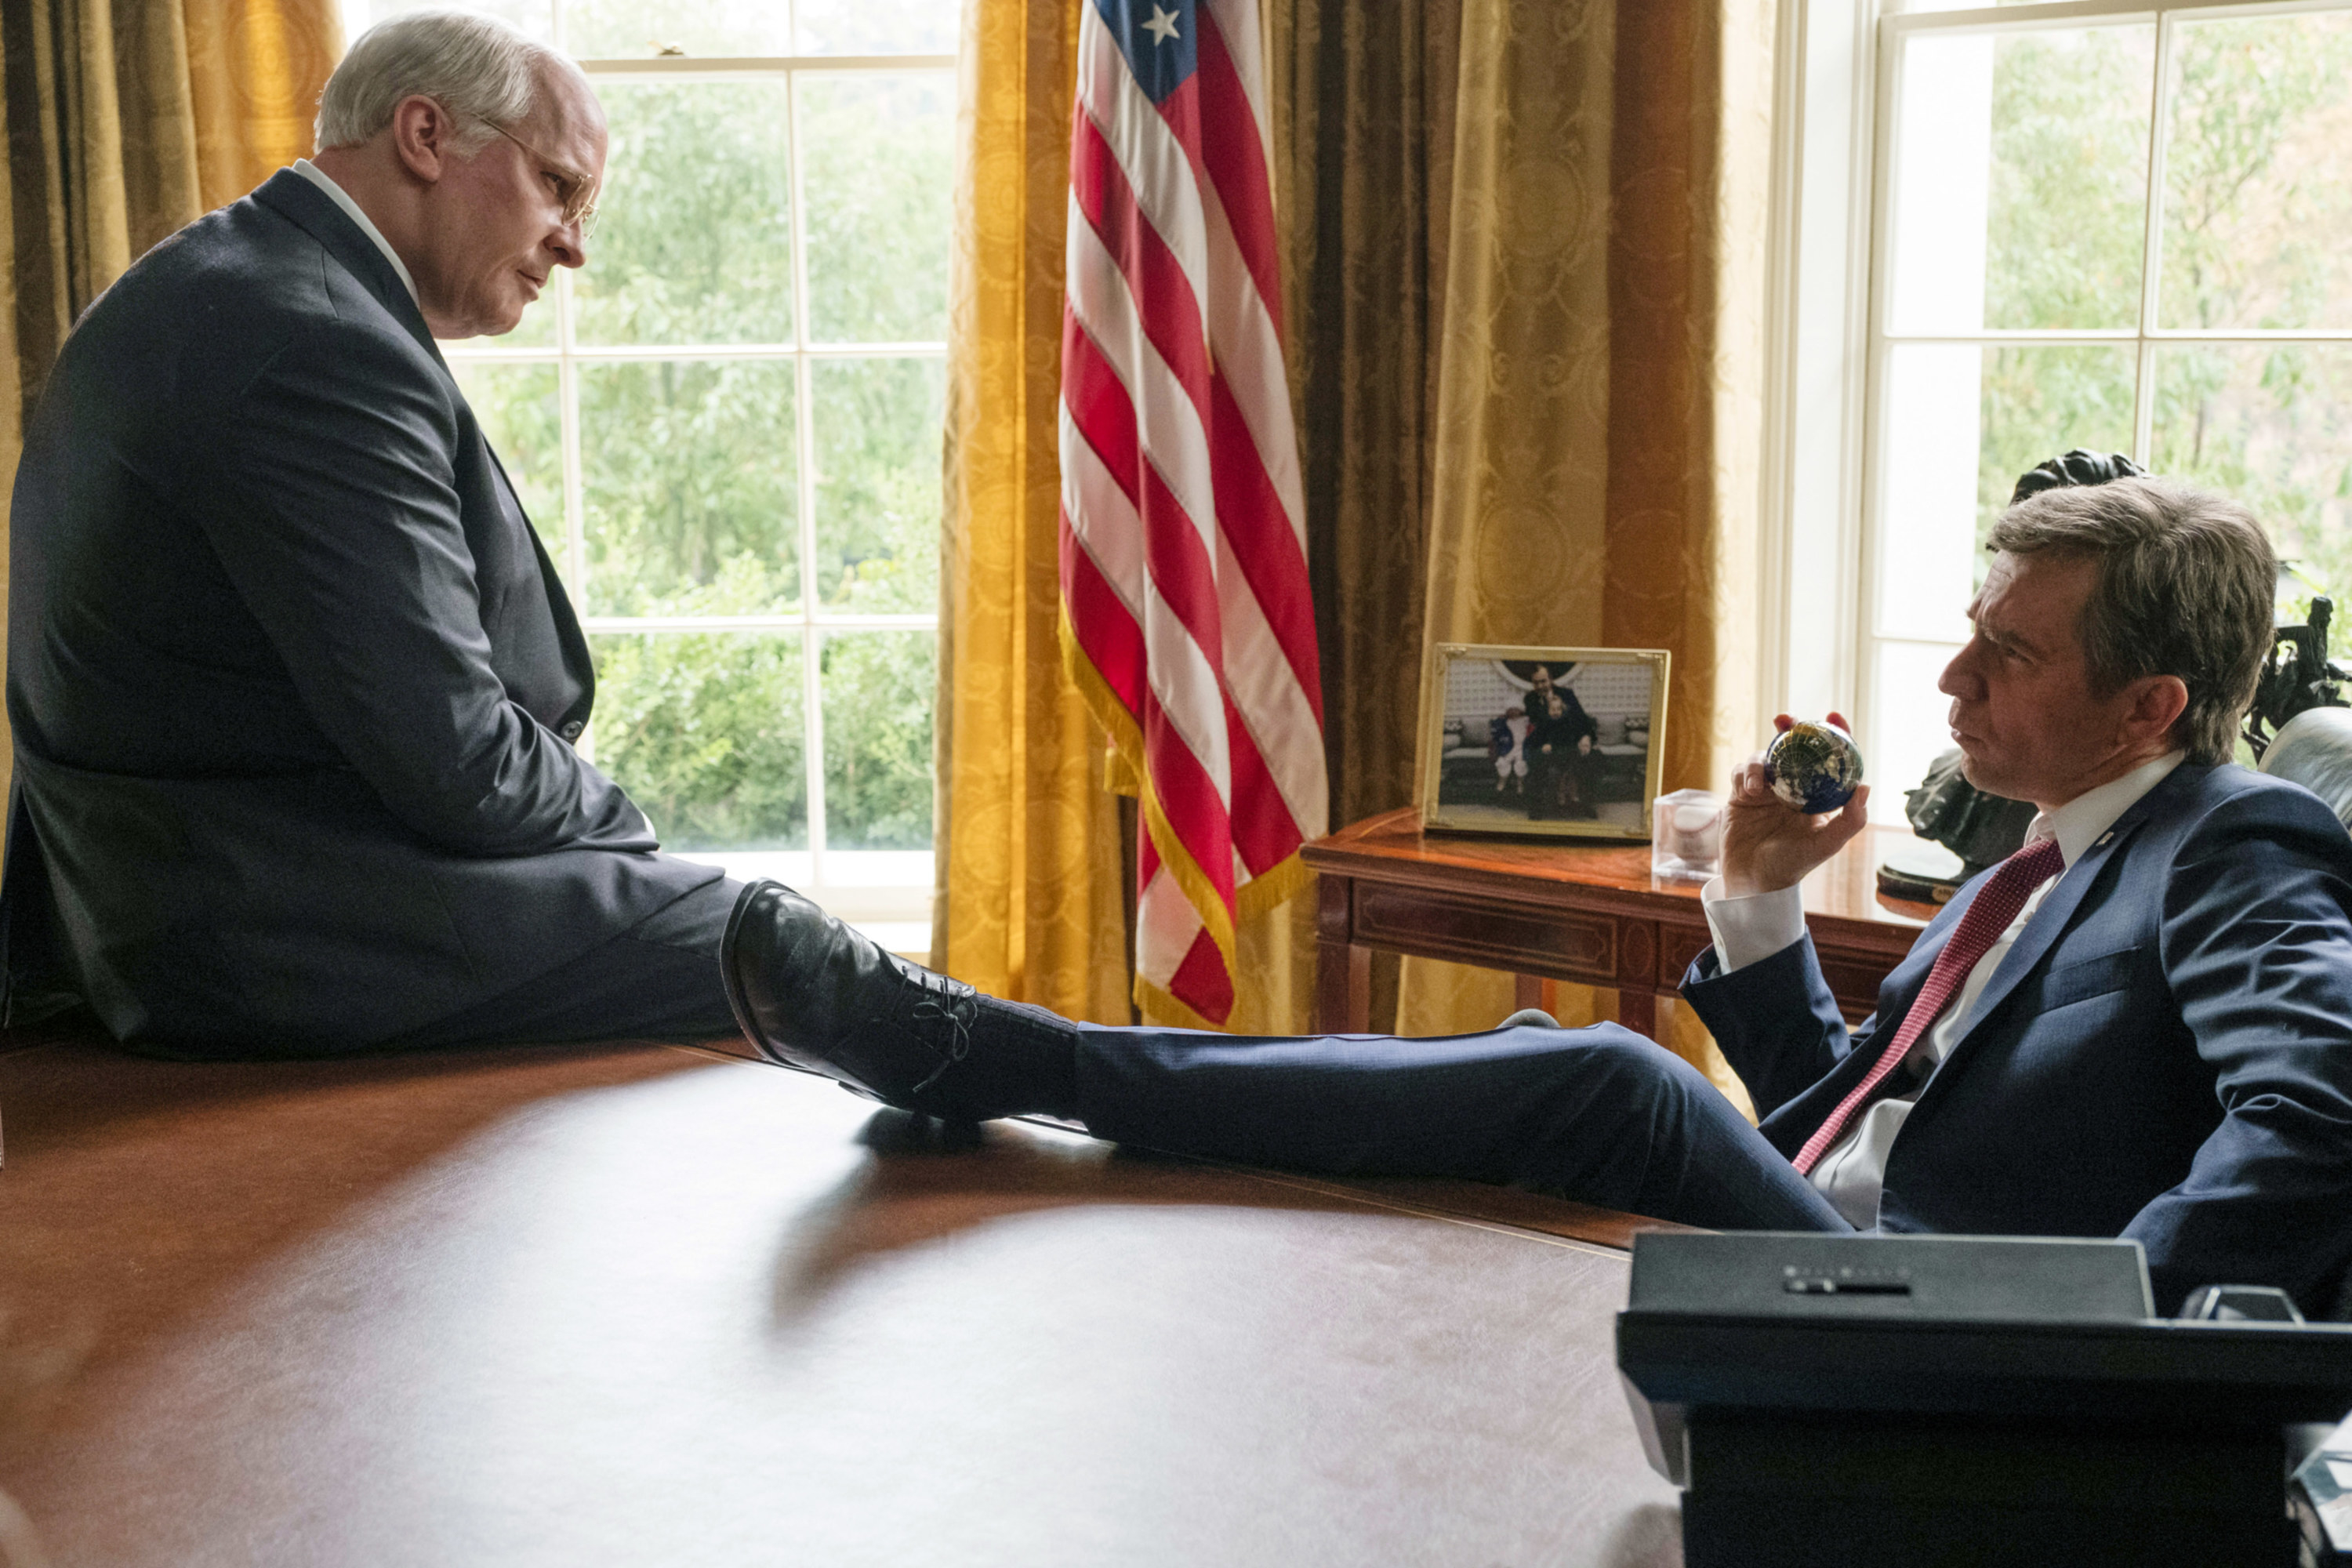 Cheney speaking to Bush in the Oval Office